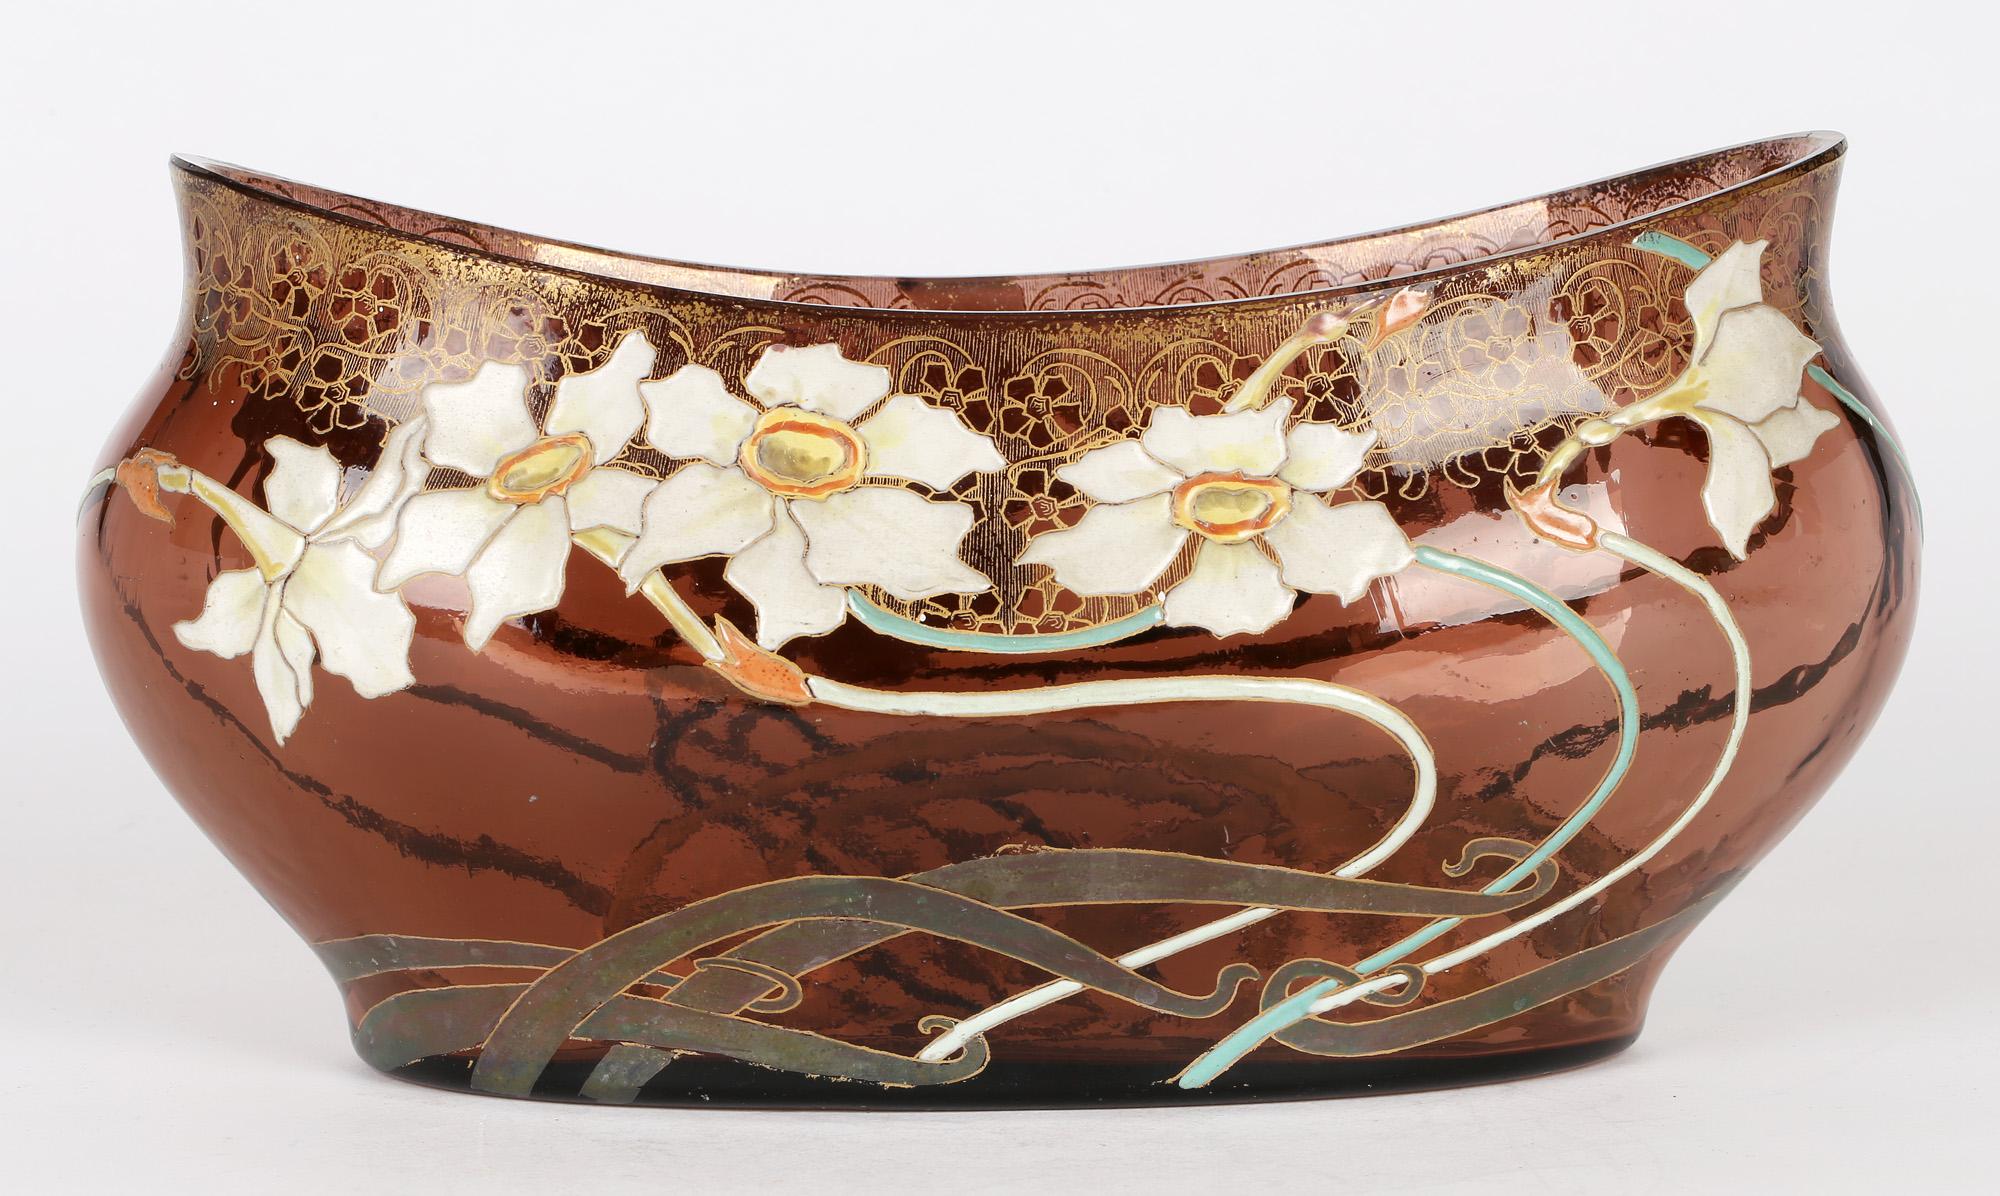 A stunning and rare French Art Nouveau floral enameled art glass jardiniere by Legras Mont Joye and dating from around 1900. Probably one of the best examples we have seen the jardiniere is of long narrow shape with rounded and shaped edges and is